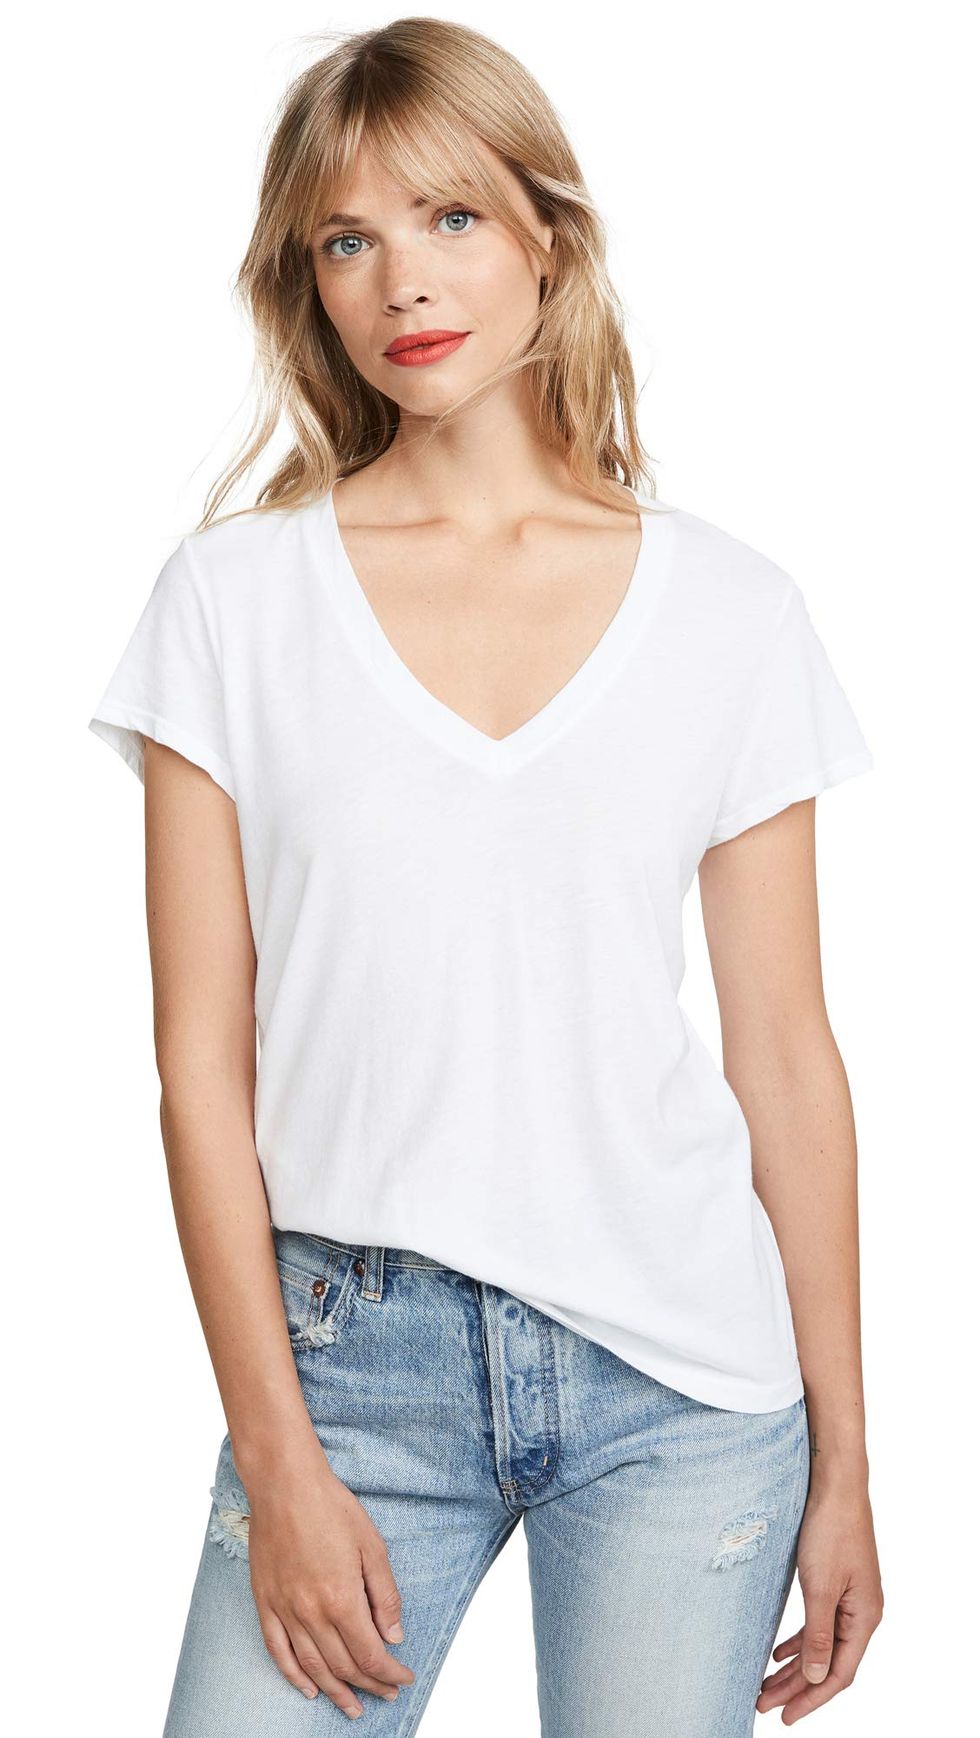 Scoop Neck T-Shirts for Women